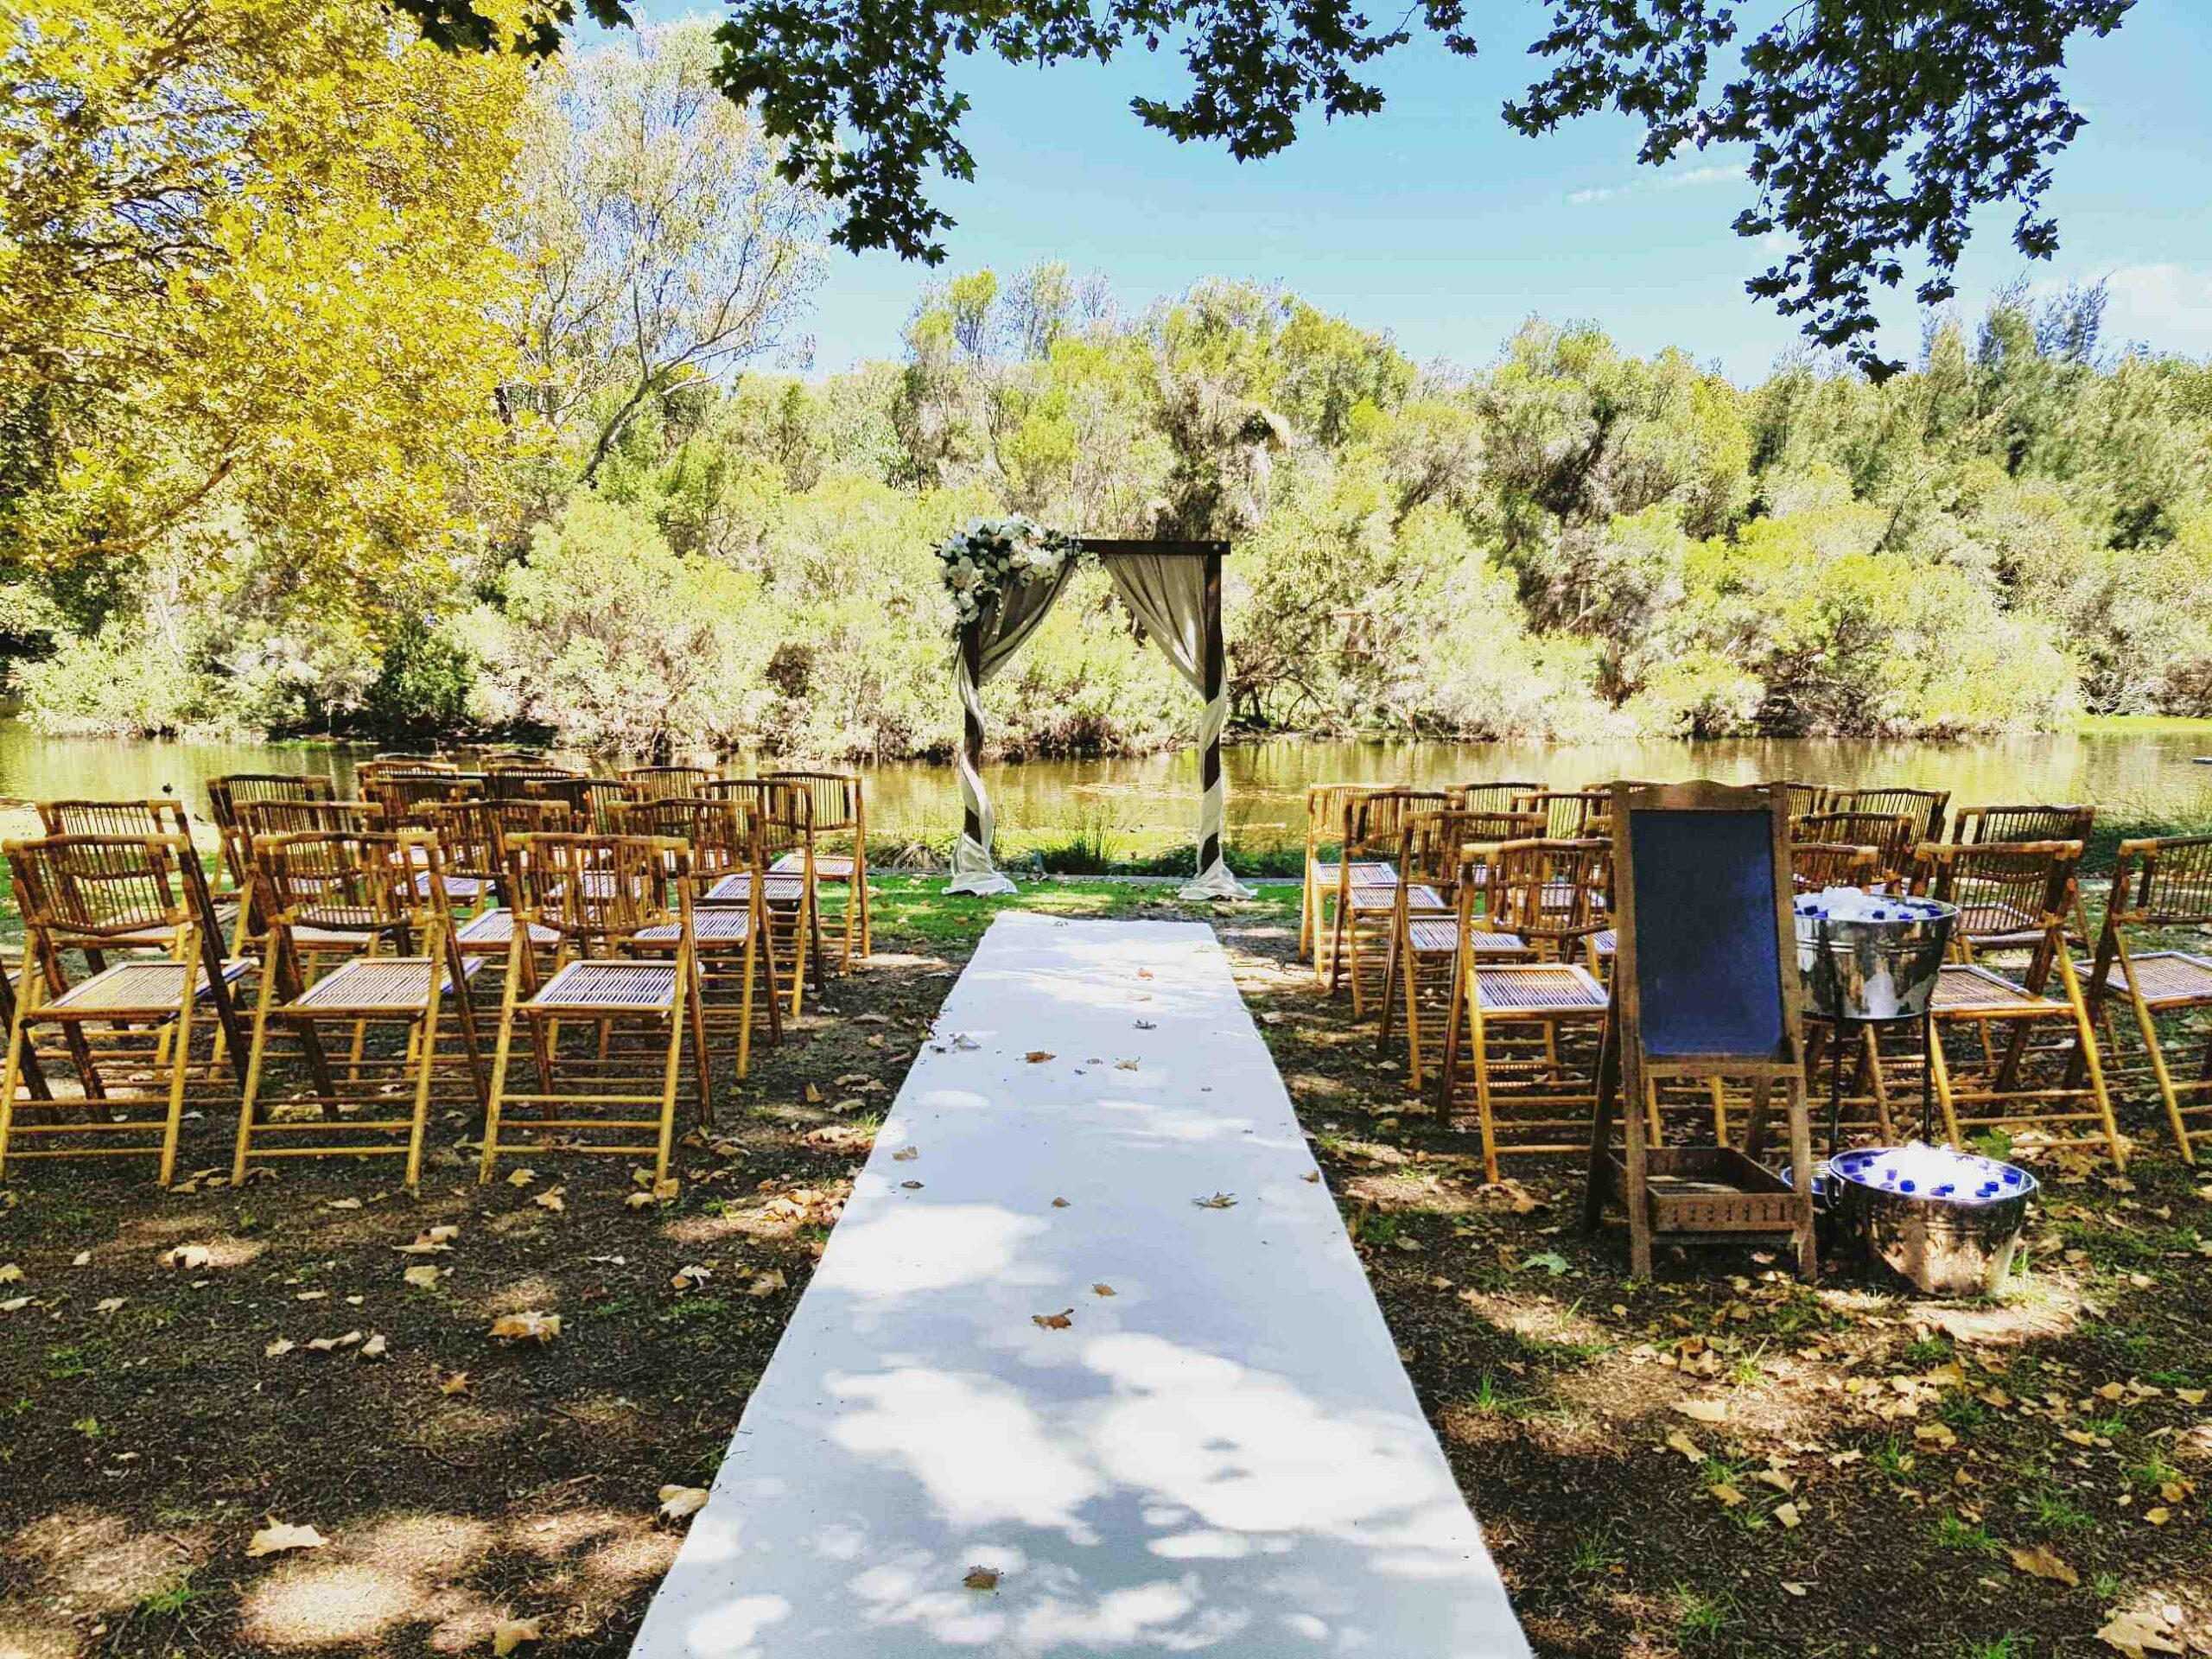 wedding ceremony hire perth <a href='#' class='view-taggged-products' data-id=1661>Click to View Products</a><div class='taggged-products-slider-wrap'><div class='heading-tag-products'></div><div class='taggged-products-slider'></div></div><div class='loading-spinner'><i class='fa fa-spinner fa-spin'></i></div>